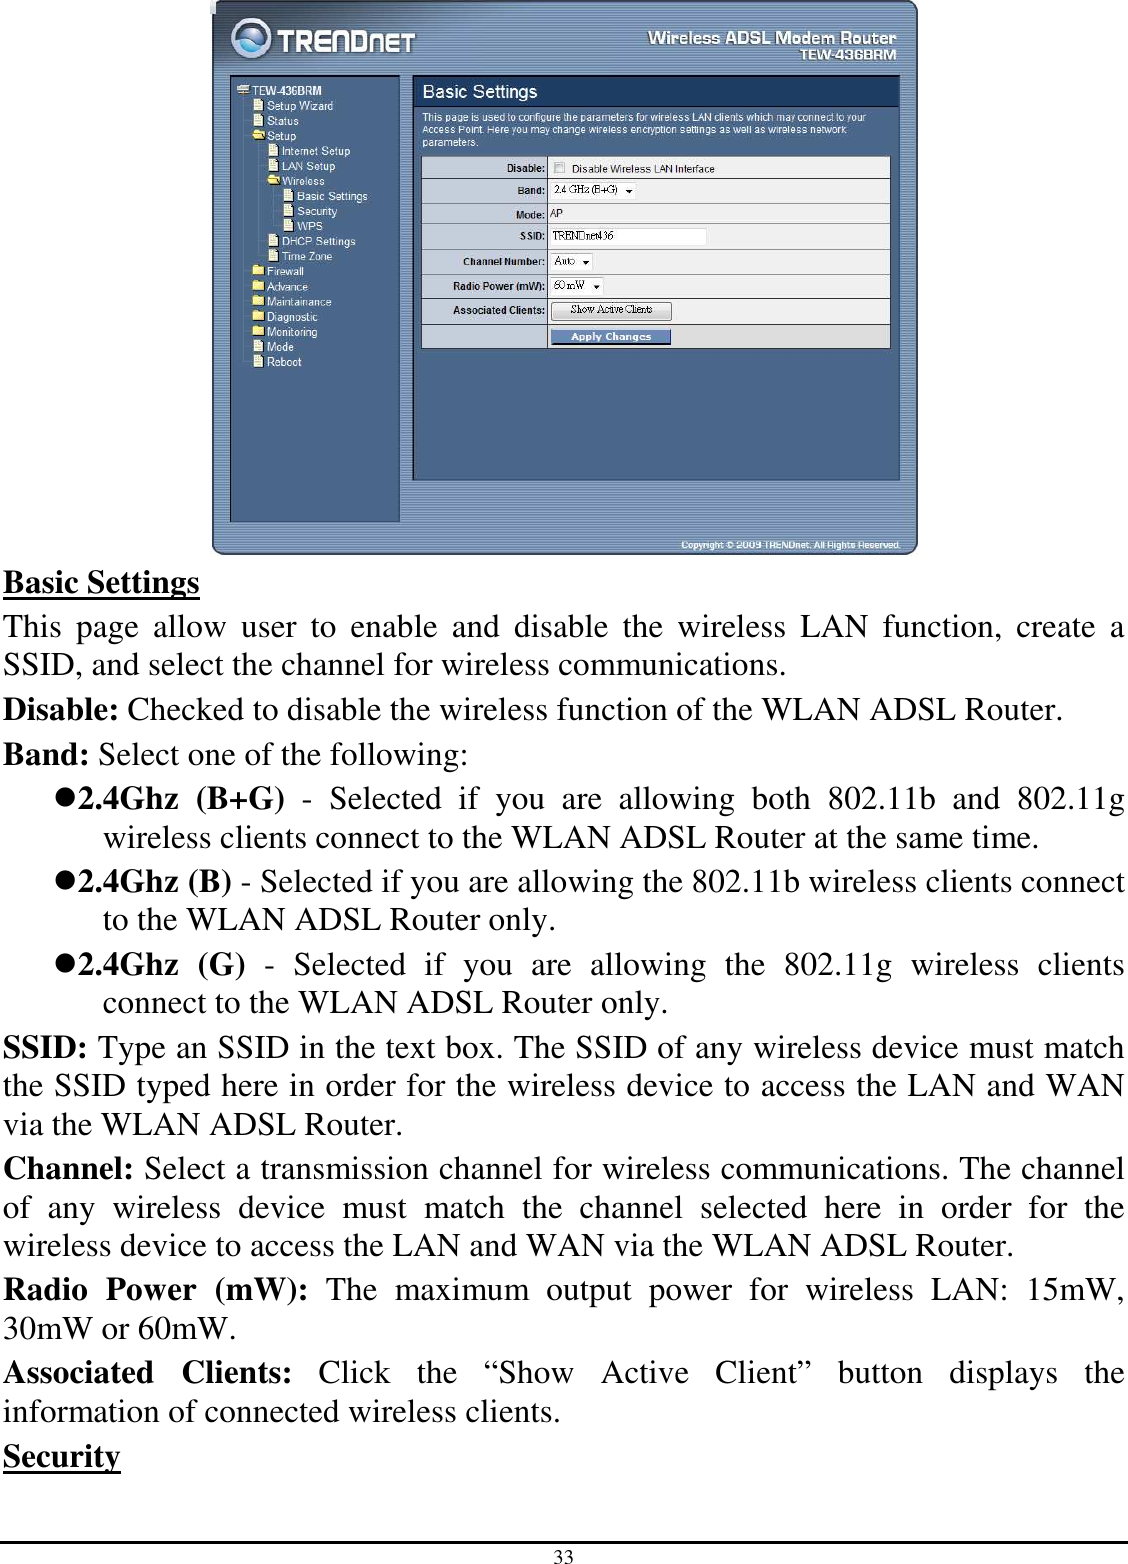 33  Basic Settings This  page  allow  user  to  enable  and  disable  the  wireless  LAN  function,  create  a SSID, and select the channel for wireless communications. Disable: Checked to disable the wireless function of the WLAN ADSL Router. Band: Select one of the following: 2.4Ghz  (B+G)  -  Selected  if  you  are  allowing  both  802.11b  and  802.11g wireless clients connect to the WLAN ADSL Router at the same time. 2.4Ghz (B) - Selected if you are allowing the 802.11b wireless clients connect to the WLAN ADSL Router only. 2.4Ghz  (G)  -  Selected  if  you  are  allowing  the  802.11g  wireless  clients connect to the WLAN ADSL Router only. SSID: Type an SSID in the text box. The SSID of any wireless device must match the SSID typed here in order for the wireless device to access the LAN and WAN via the WLAN ADSL Router. Channel: Select a transmission channel for wireless communications. The channel of  any  wireless  device  must  match  the  channel  selected  here  in  order  for  the wireless device to access the LAN and WAN via the WLAN ADSL Router. Radio  Power  (mW):  The  maximum  output  power  for  wireless  LAN:  15mW, 30mW or 60mW. Associated  Clients:  Click  the  “Show  Active  Client”  button  displays  the information of connected wireless clients. Security  